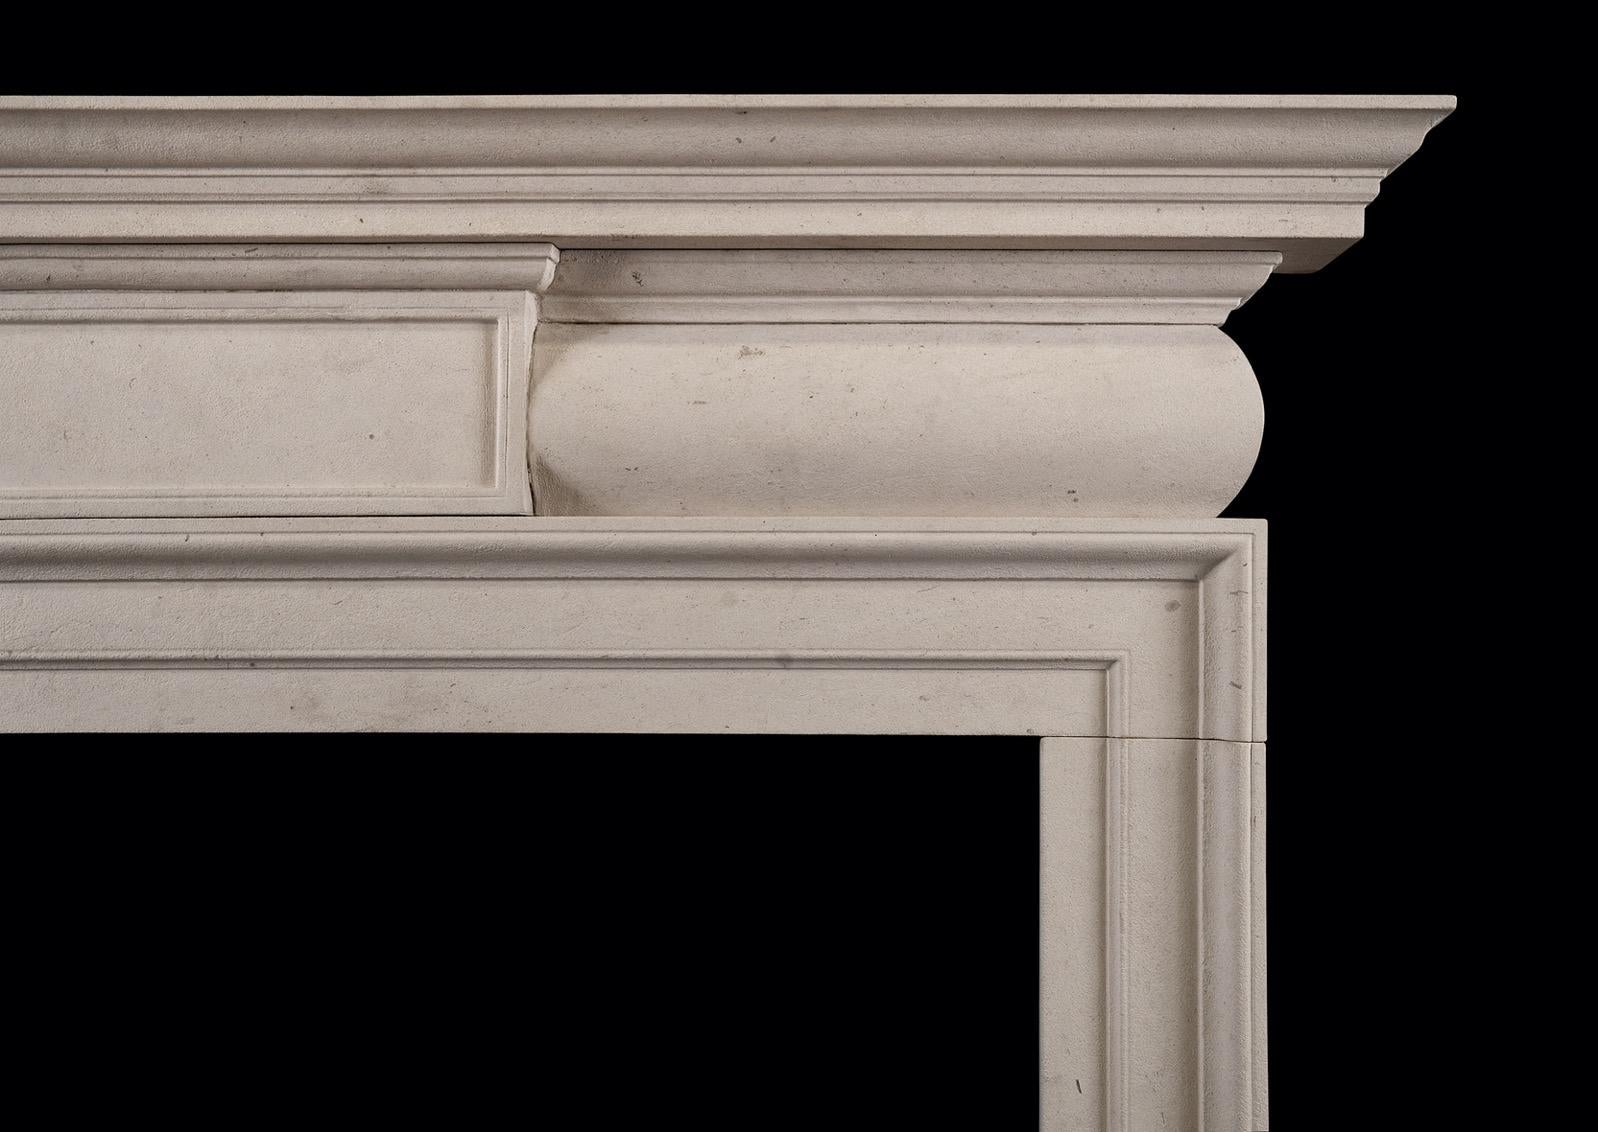 A good quality English Georgian style fireplace in Moleanos limestone. The barrel frieze with centre panel, surmounted by moulded shelf. A fine quality copy of a period piece. N.B. May be subject to an extended lead time, please enquire for more